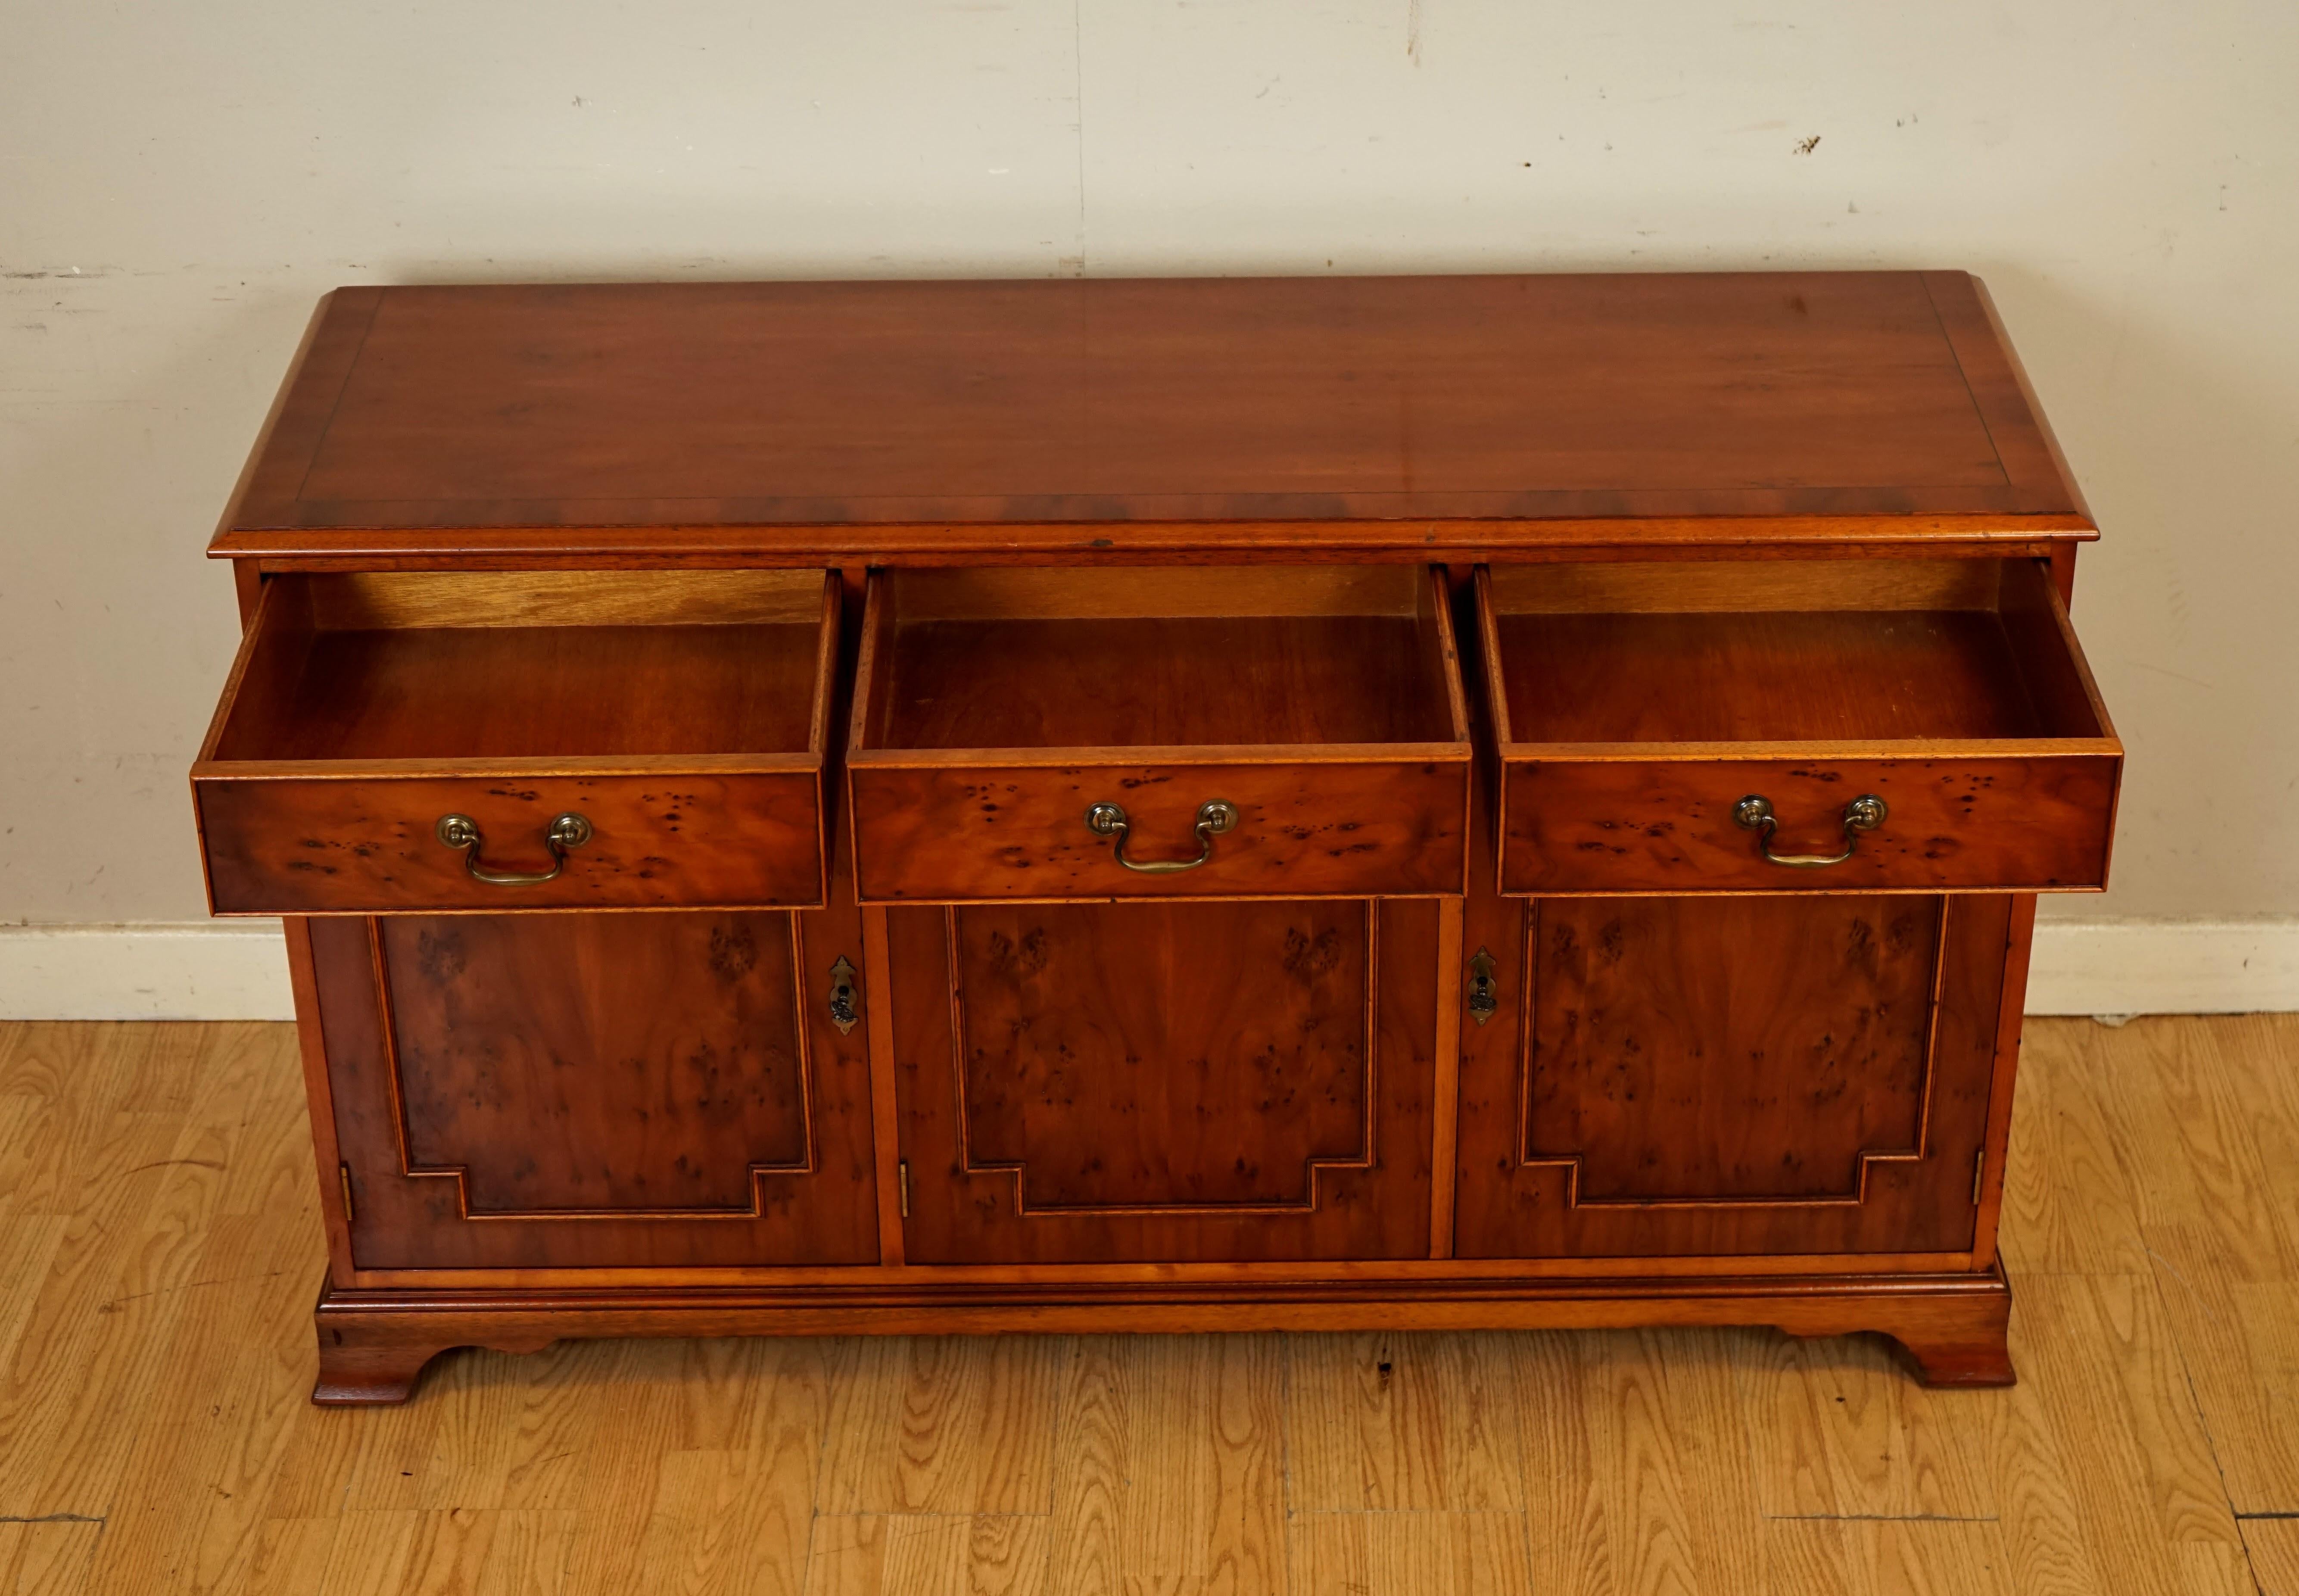 Hand-Crafted Stunning English Burr Yew Wood Triple Drawer Sideboard Cupboard Made by Bradley 